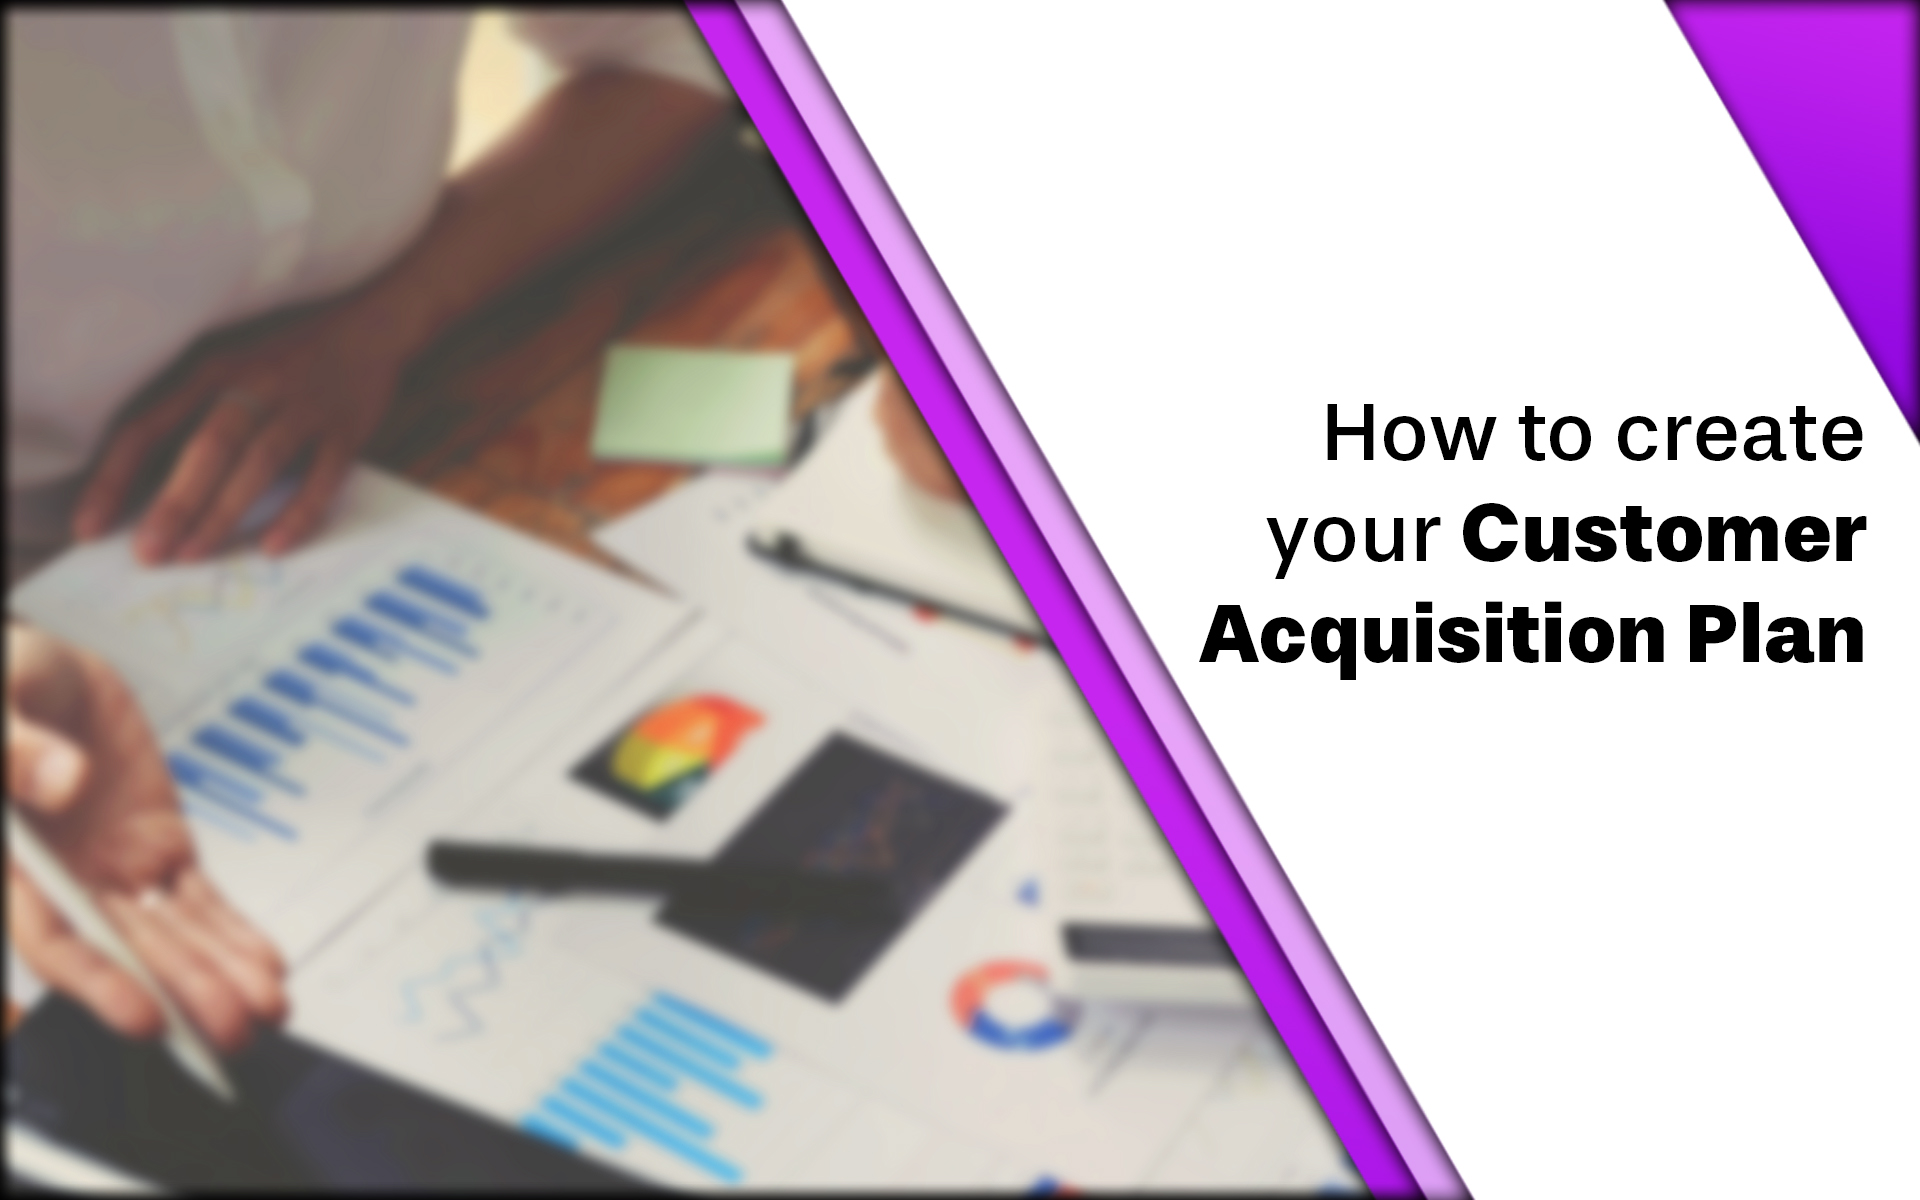 How to create your customer acquisition plan